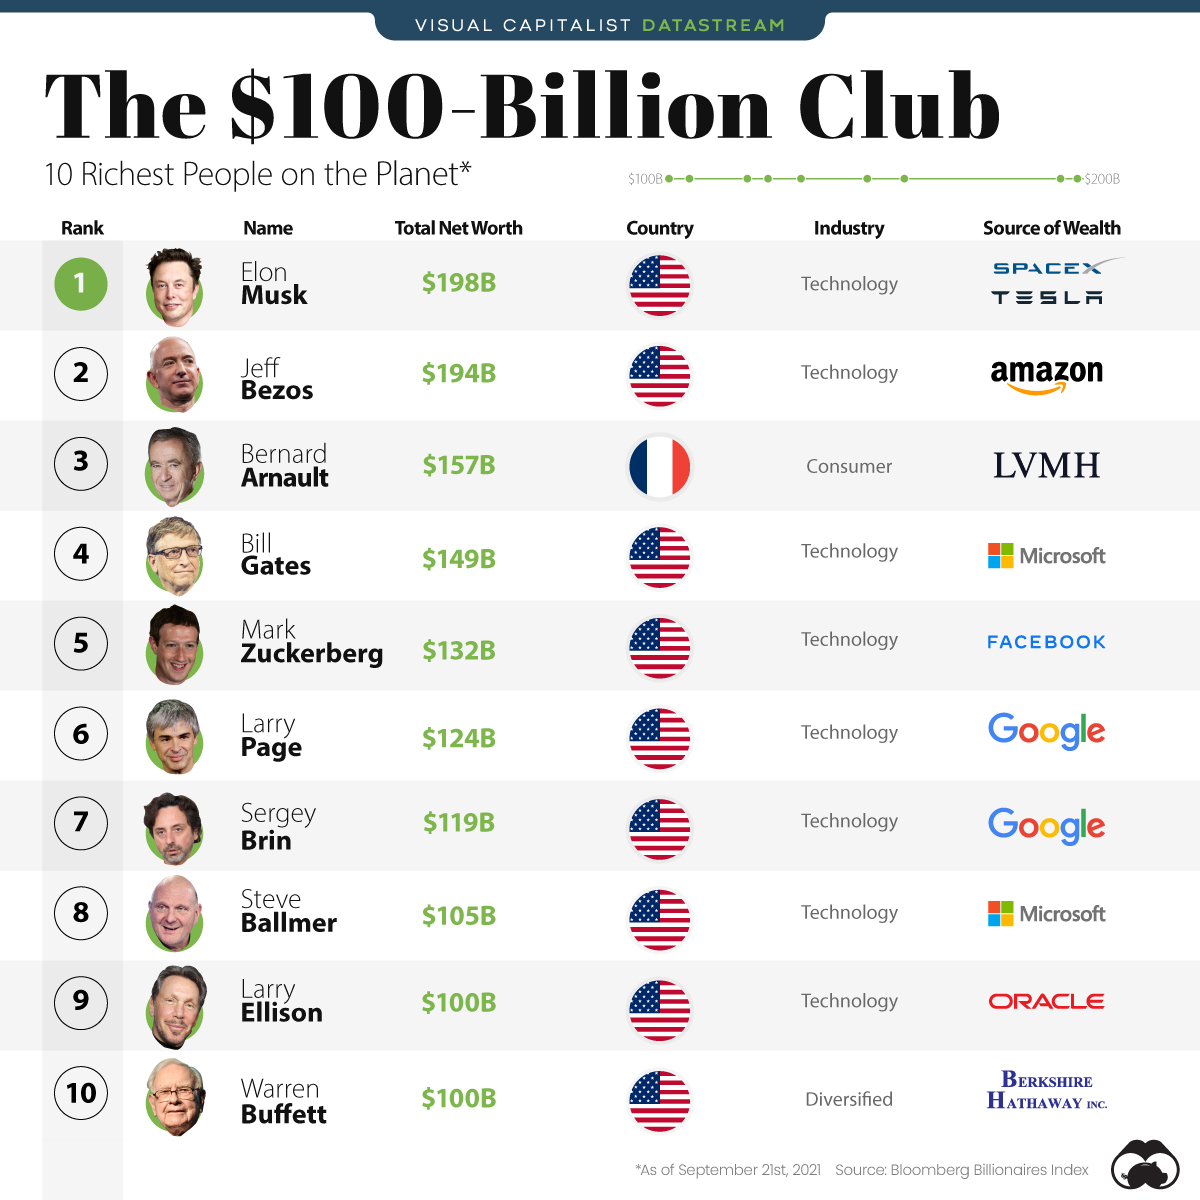 Ranked The Top 10 Richest People on the